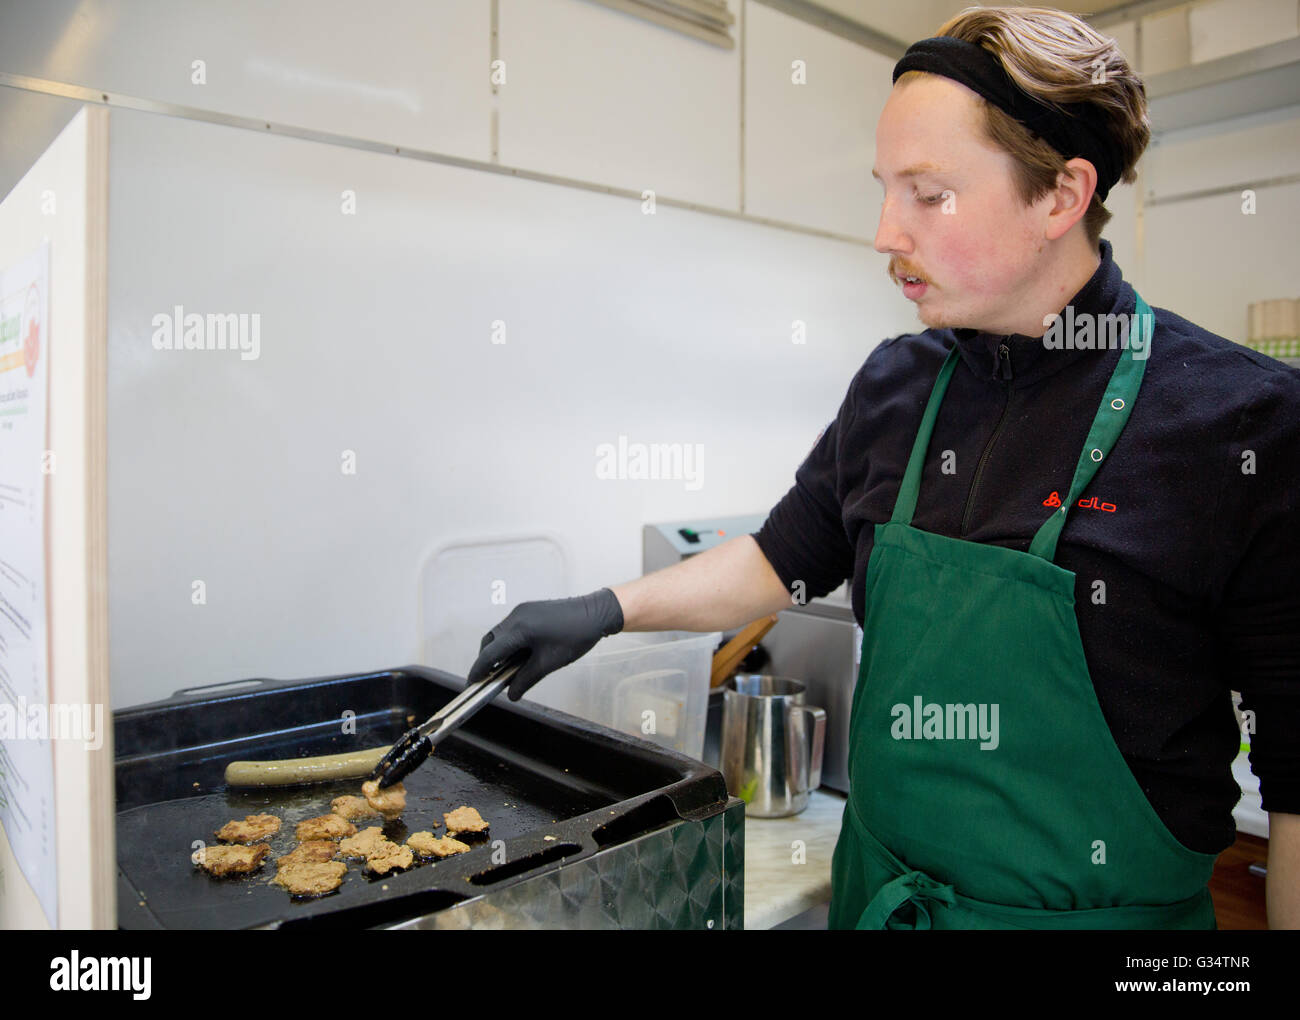 Stefan Vinzelberg prepares soy patties for a burger in his vegan fast food stall in Bamberg, Germany, 29 April 2016. The 29-year-old man has been a vegetarian for 14 years and a vegan for nine years. He has opened his own stall Vegbereitung in Bamburg in the spring. Photo: DANIEL KARMANN/dpa Stock Photo